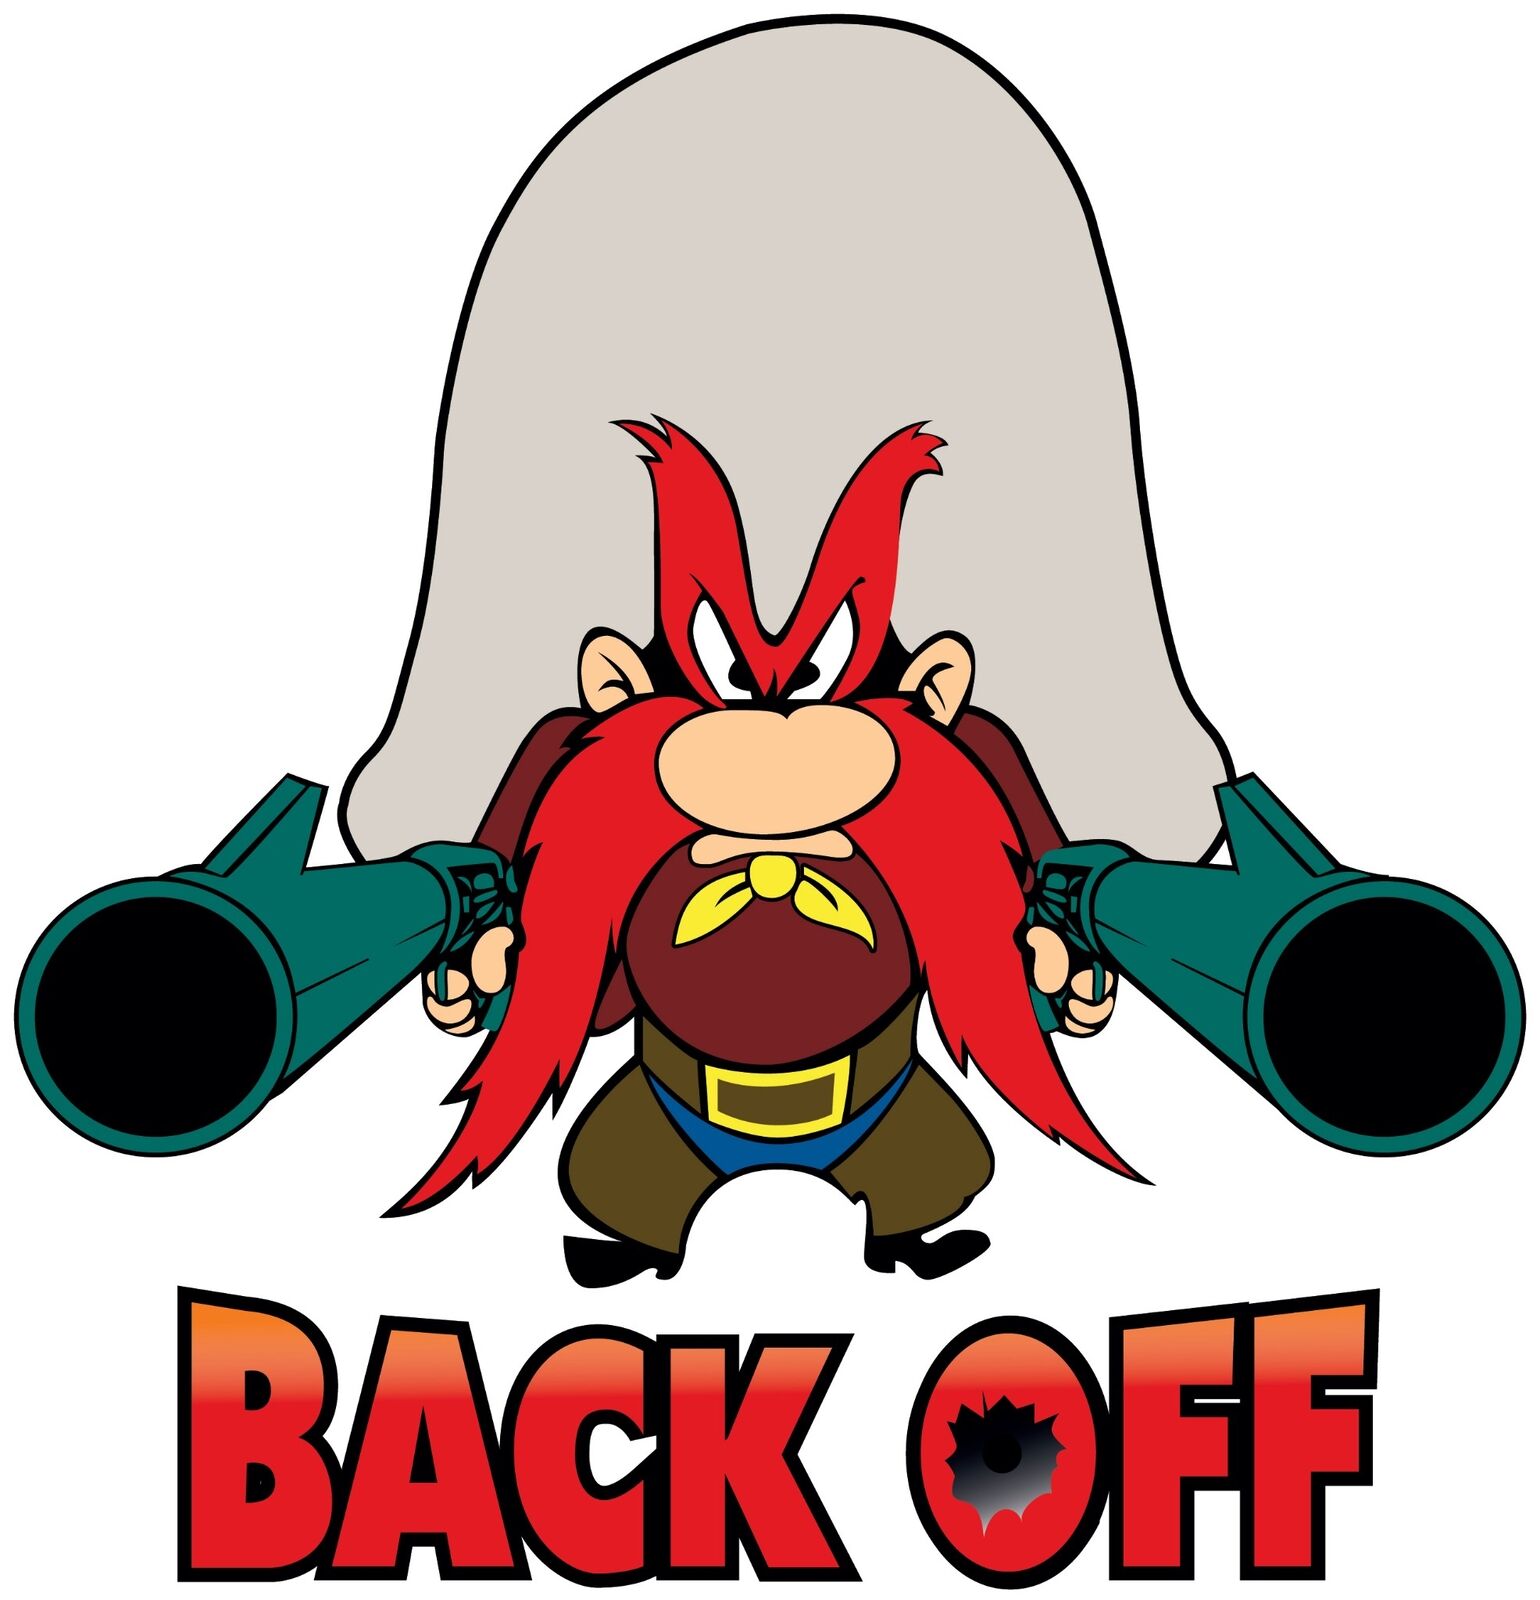 Yosemite Sam Back Off Sticker / Vinyl Decal  | 10 Sizes with TRACKING